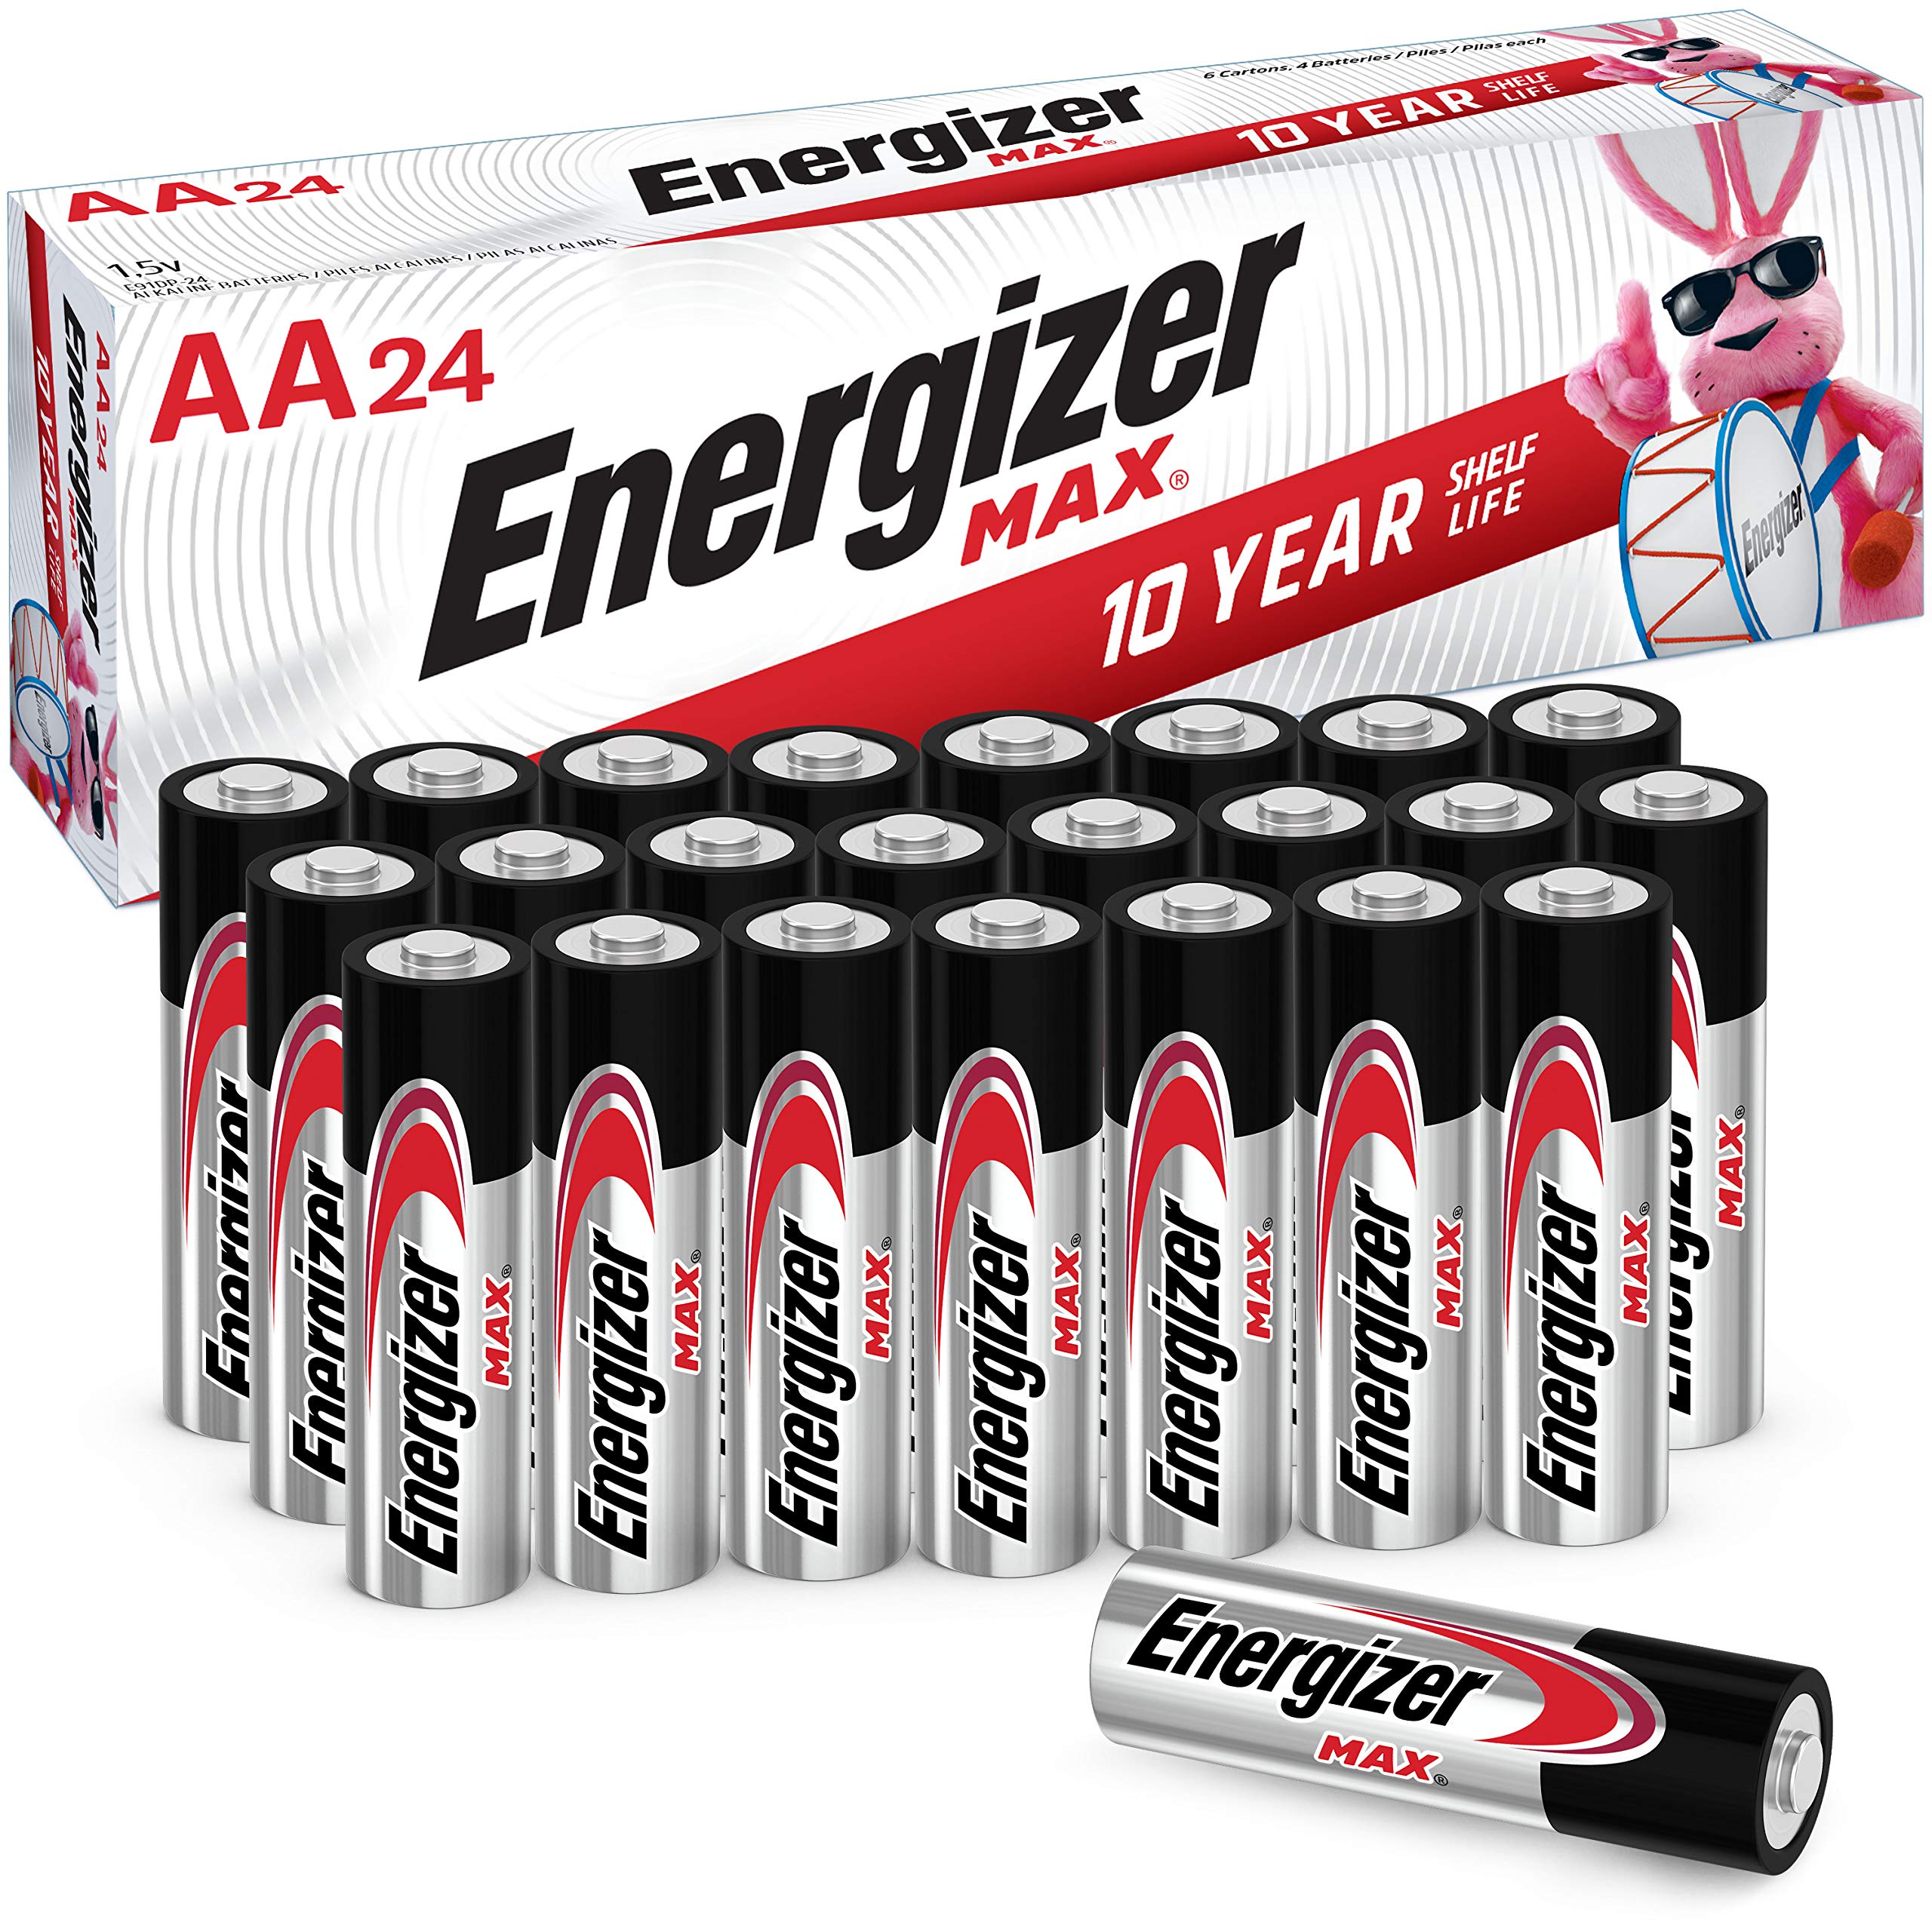 $12.18  Energizer AA Batteries Double A Max Alkaline Battery, 24 Count